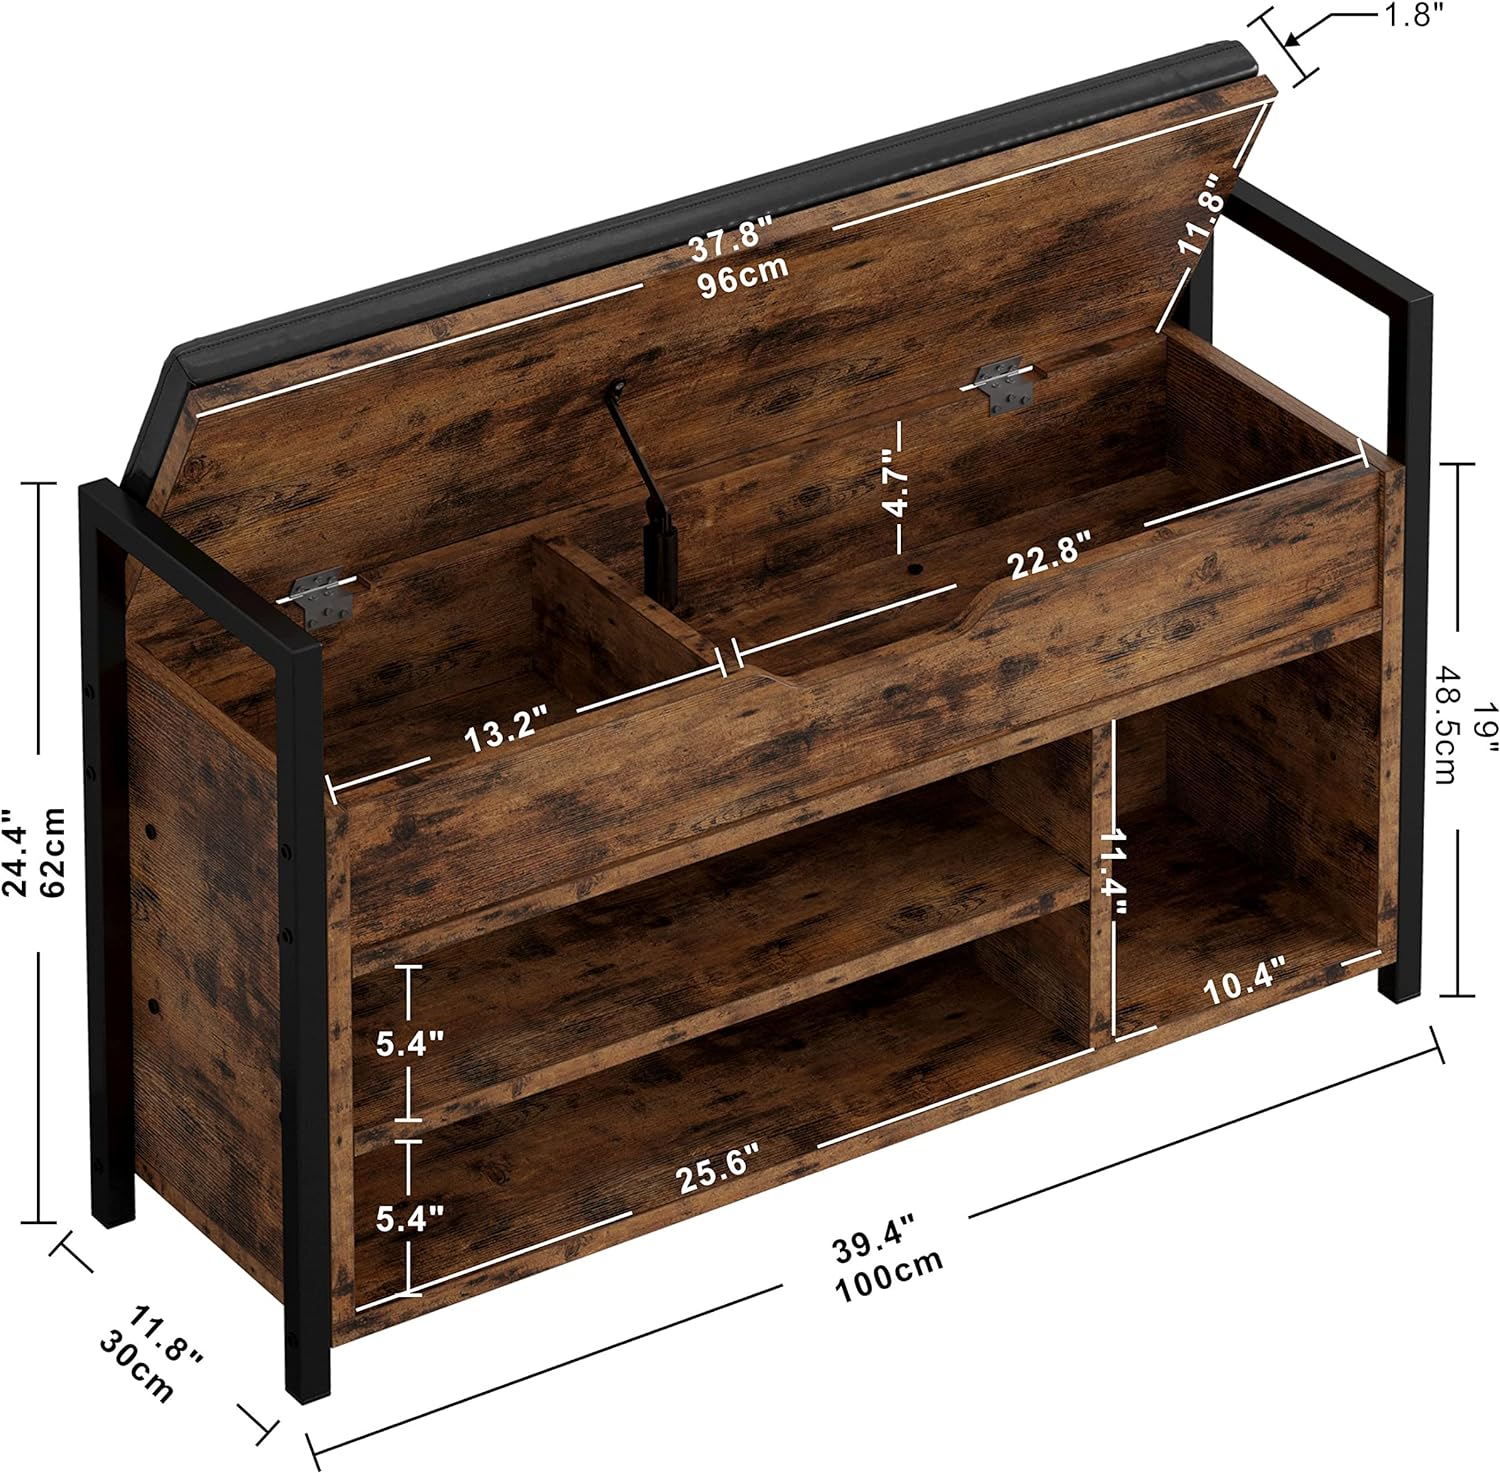 https://bigbigmart.com/wp-content/uploads/2023/12/IRONCK-Shoe-Storage-Bench-Entryway-Bench-with-Lift-Top-Storage-Box-Metal-and-Board-Bench-for-Entryway-2-Tier-Shoe-Rack-Organizer-for-Entryway-Bedroom-Hallway-Industrial-Vintage-Brown2.jpg